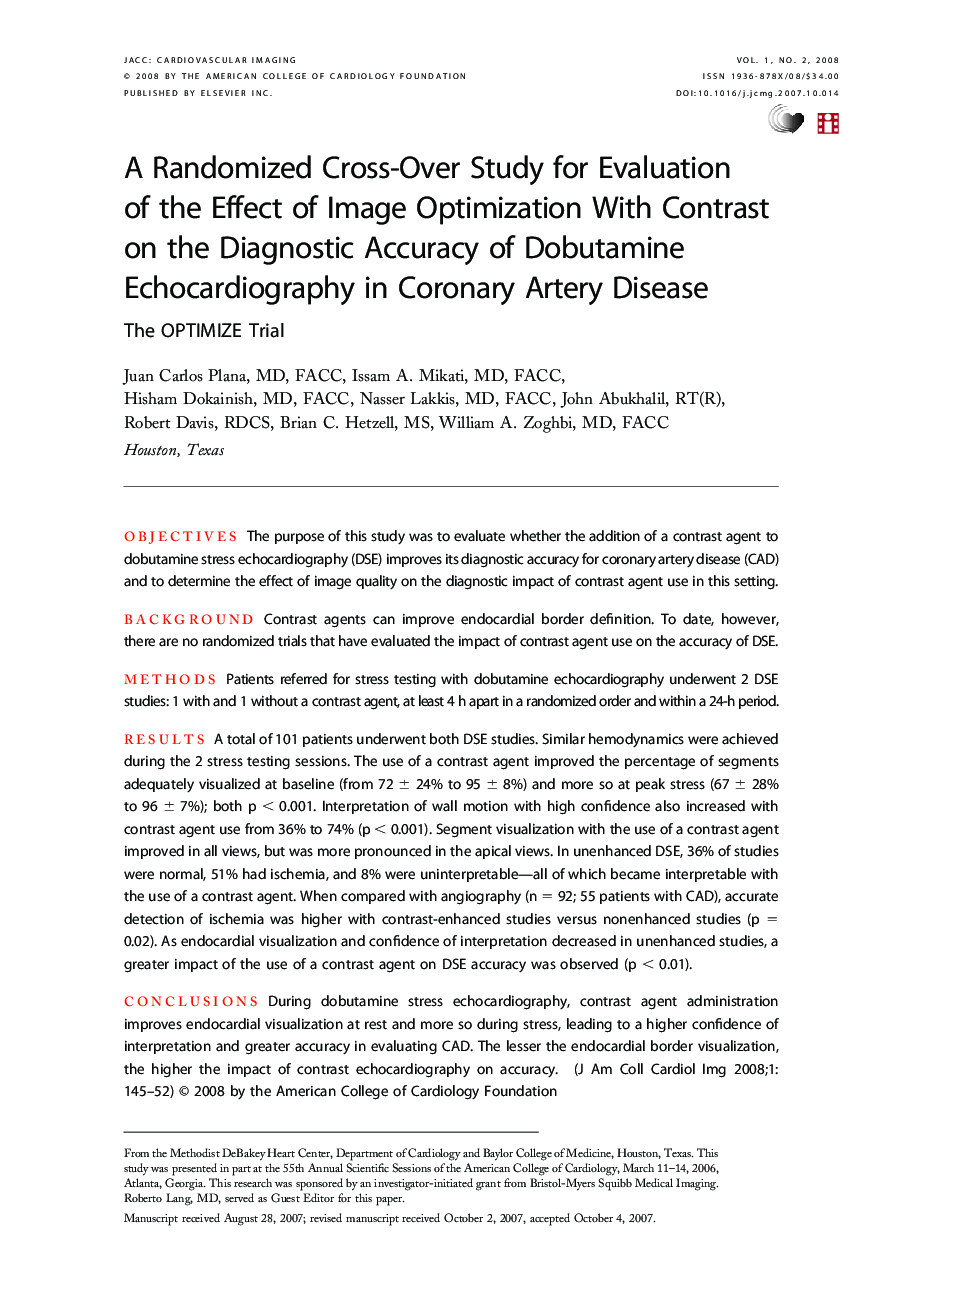 A Randomized Cross-Over Study for Evaluation of the Effect of Image Optimization With Contrast on the Diagnostic Accuracy of Dobutamine Echocardiography in Coronary Artery Disease : The OPTIMIZE Trial